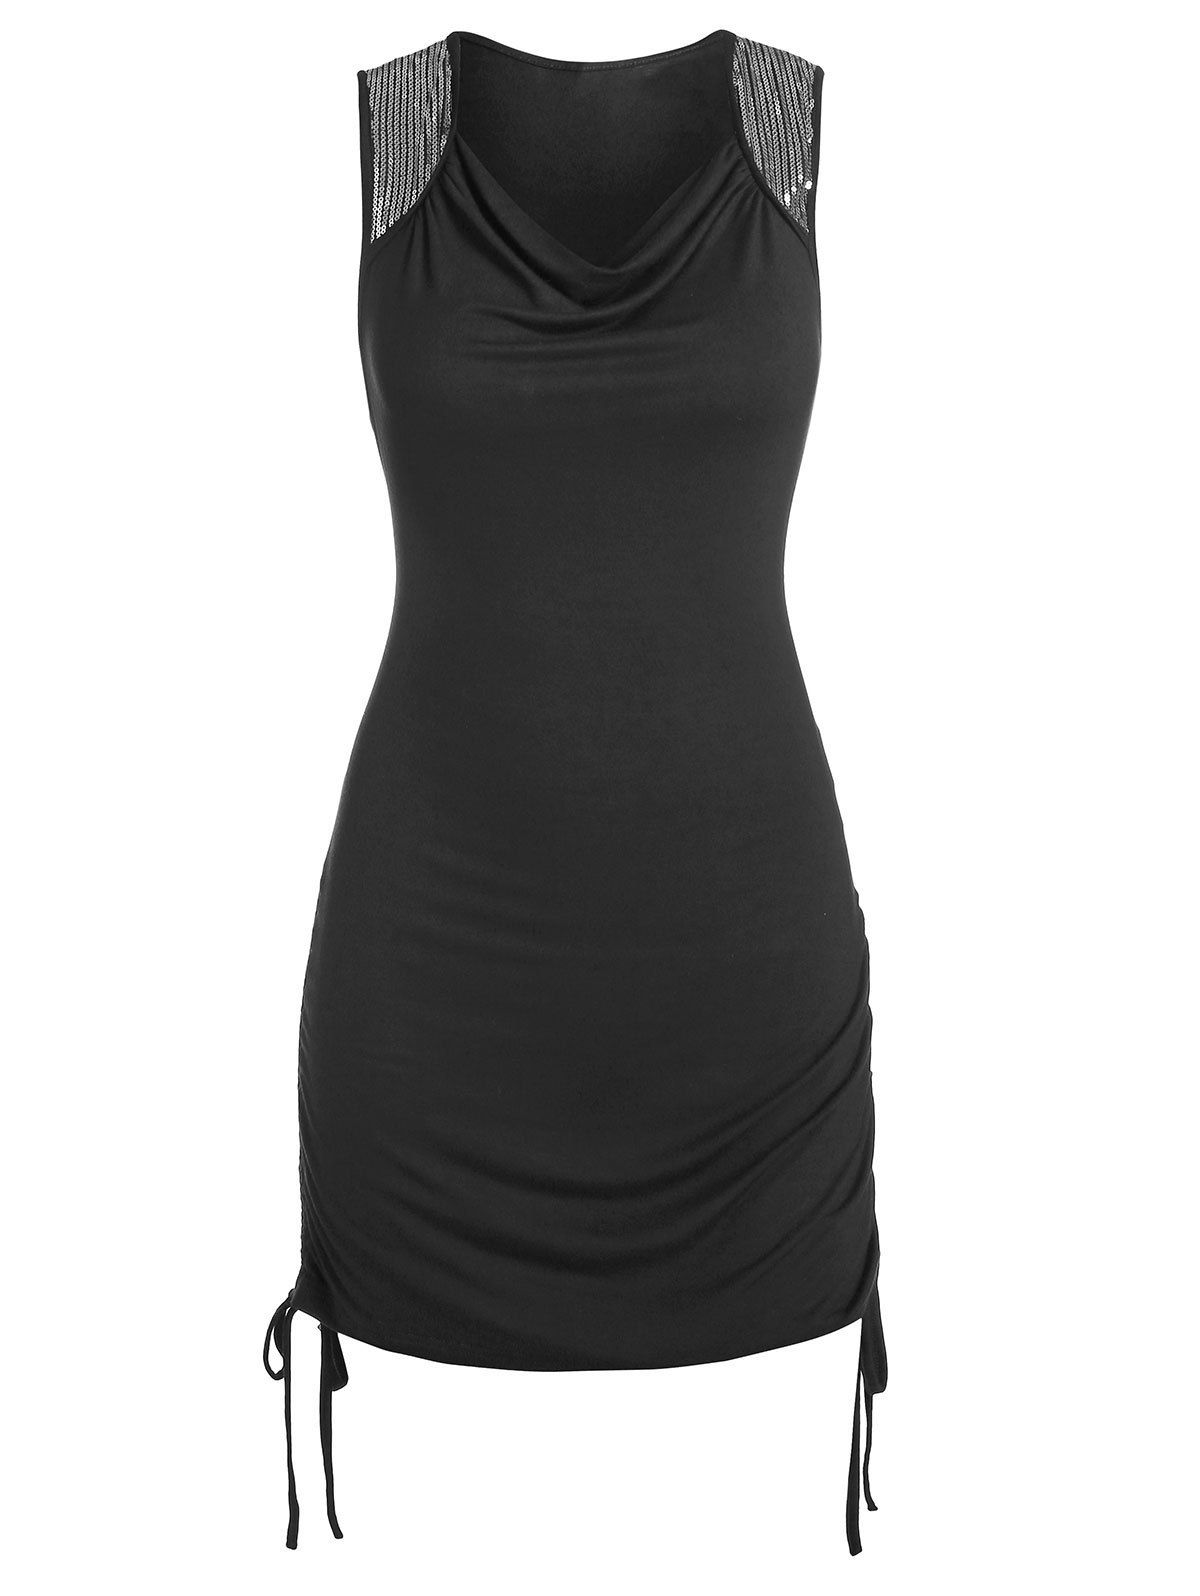 Plain Sequin Tank Dress Draped Cinched Tie Fitted Bodycon Slinky Sleeveless Short Dress - BLACK M